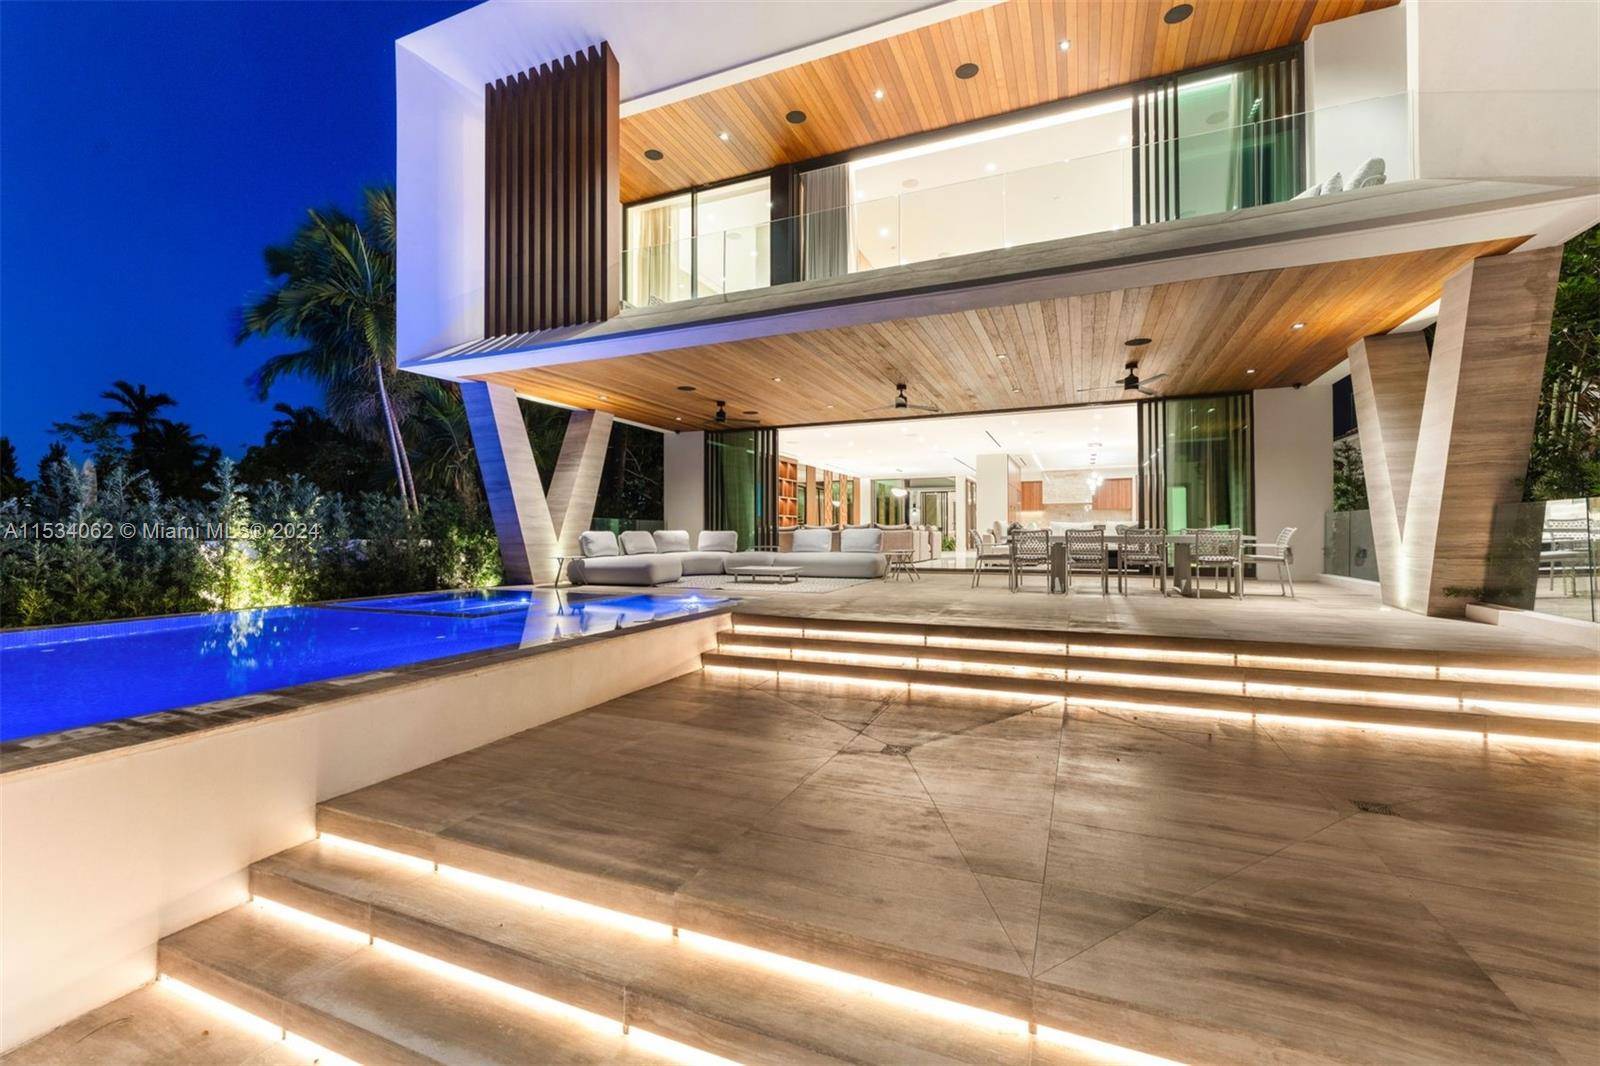 Discover an unrivaled masterpiece of modern tropical design in prestigious Surfside.